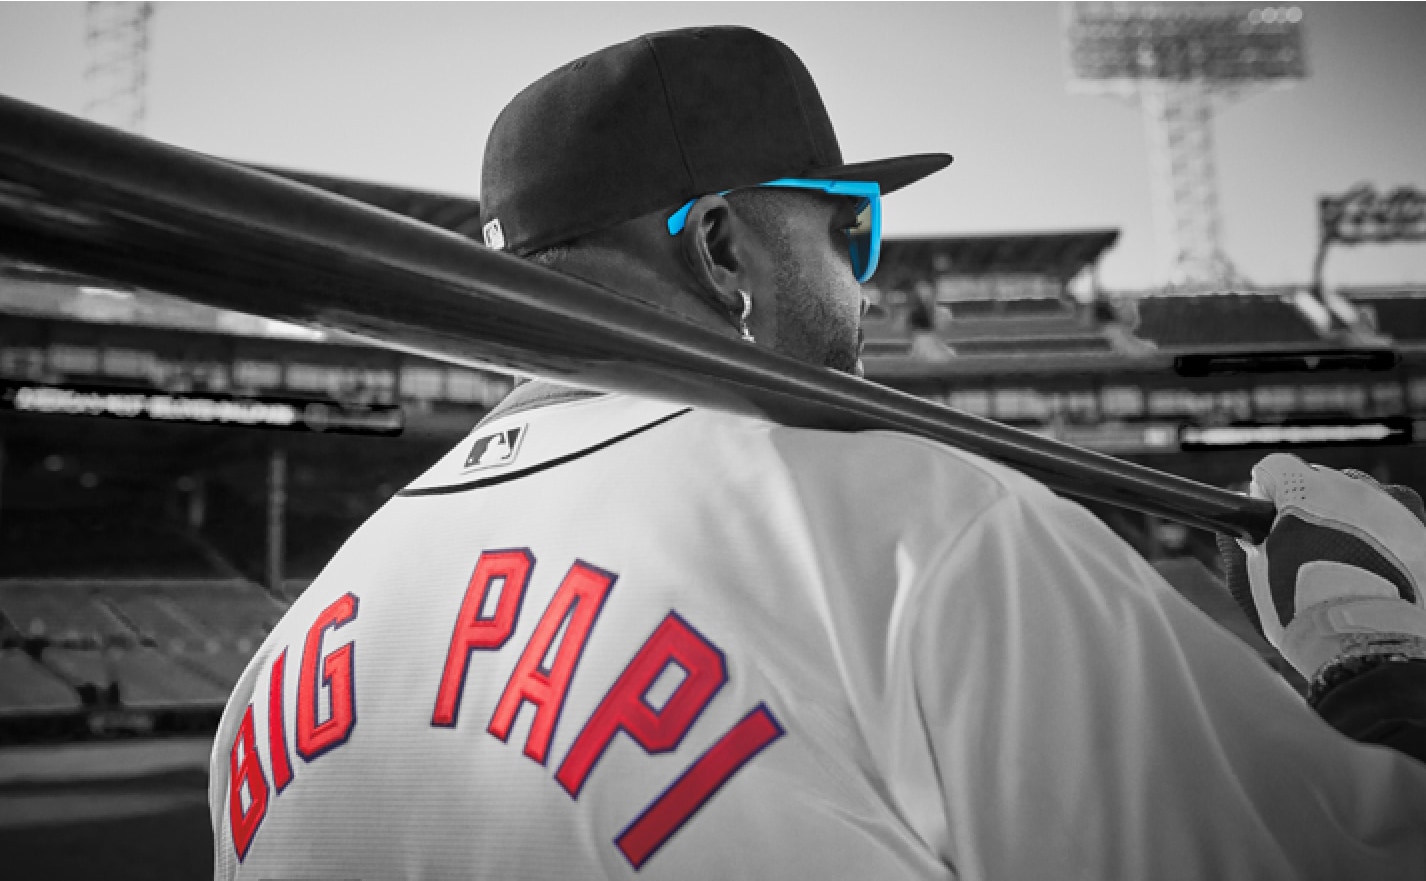 Image of David Ortiz in black and white, wearing Zenni sunglasses and a jersey that says ‘Big Papi’ on the back, carrying a baseball bat.